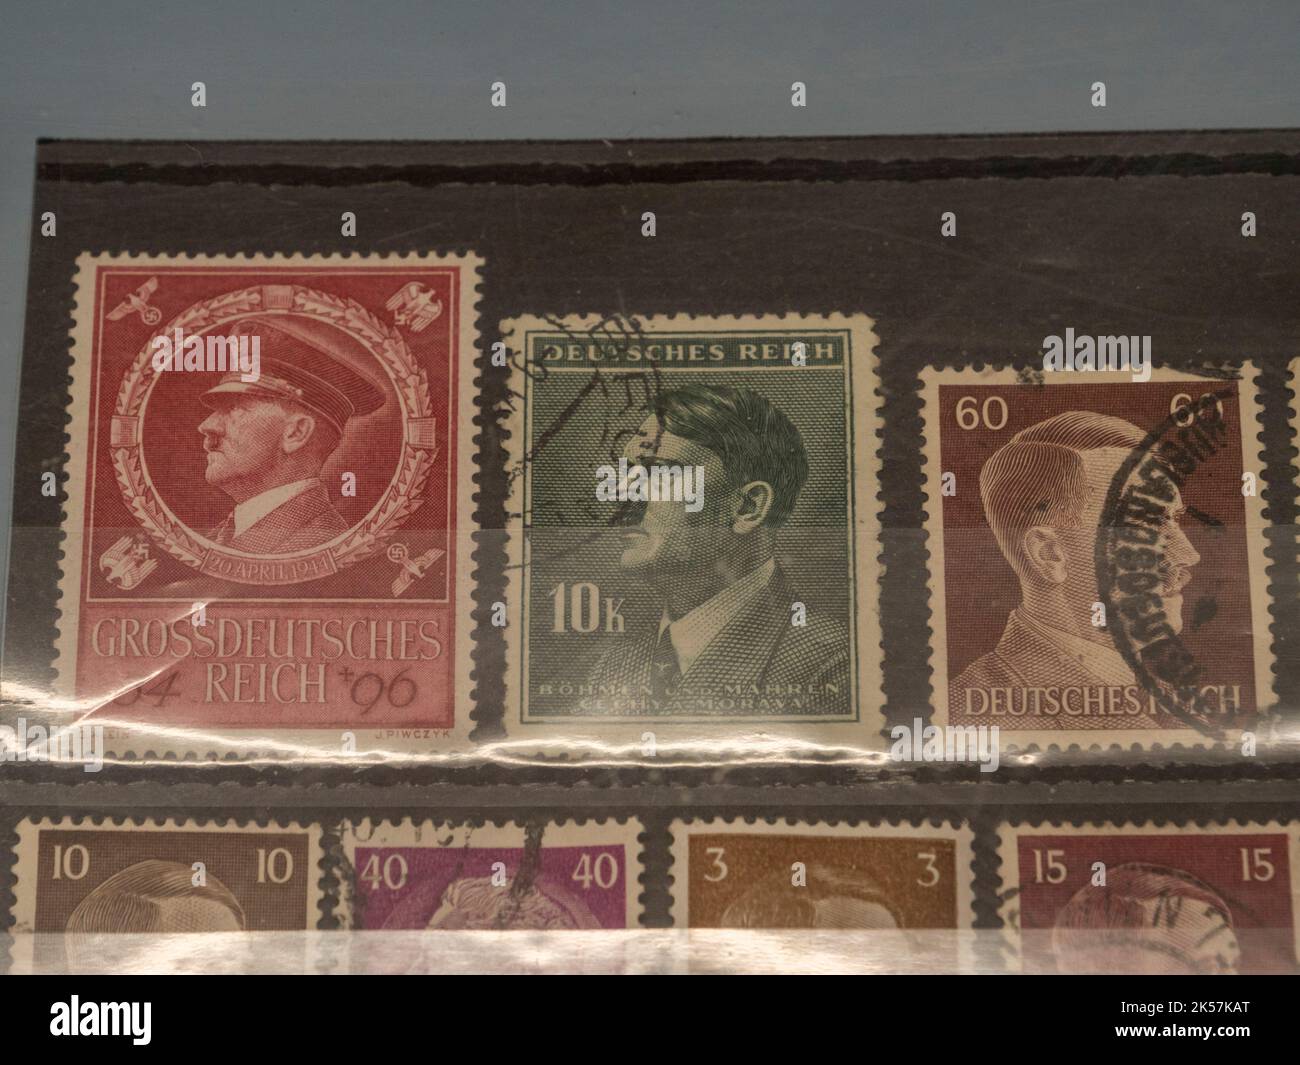 Used German Adolf Hitler stamps (see notes) in the RAF Manston History Museum, Ramsgate, Kent, UK. Stock Photo